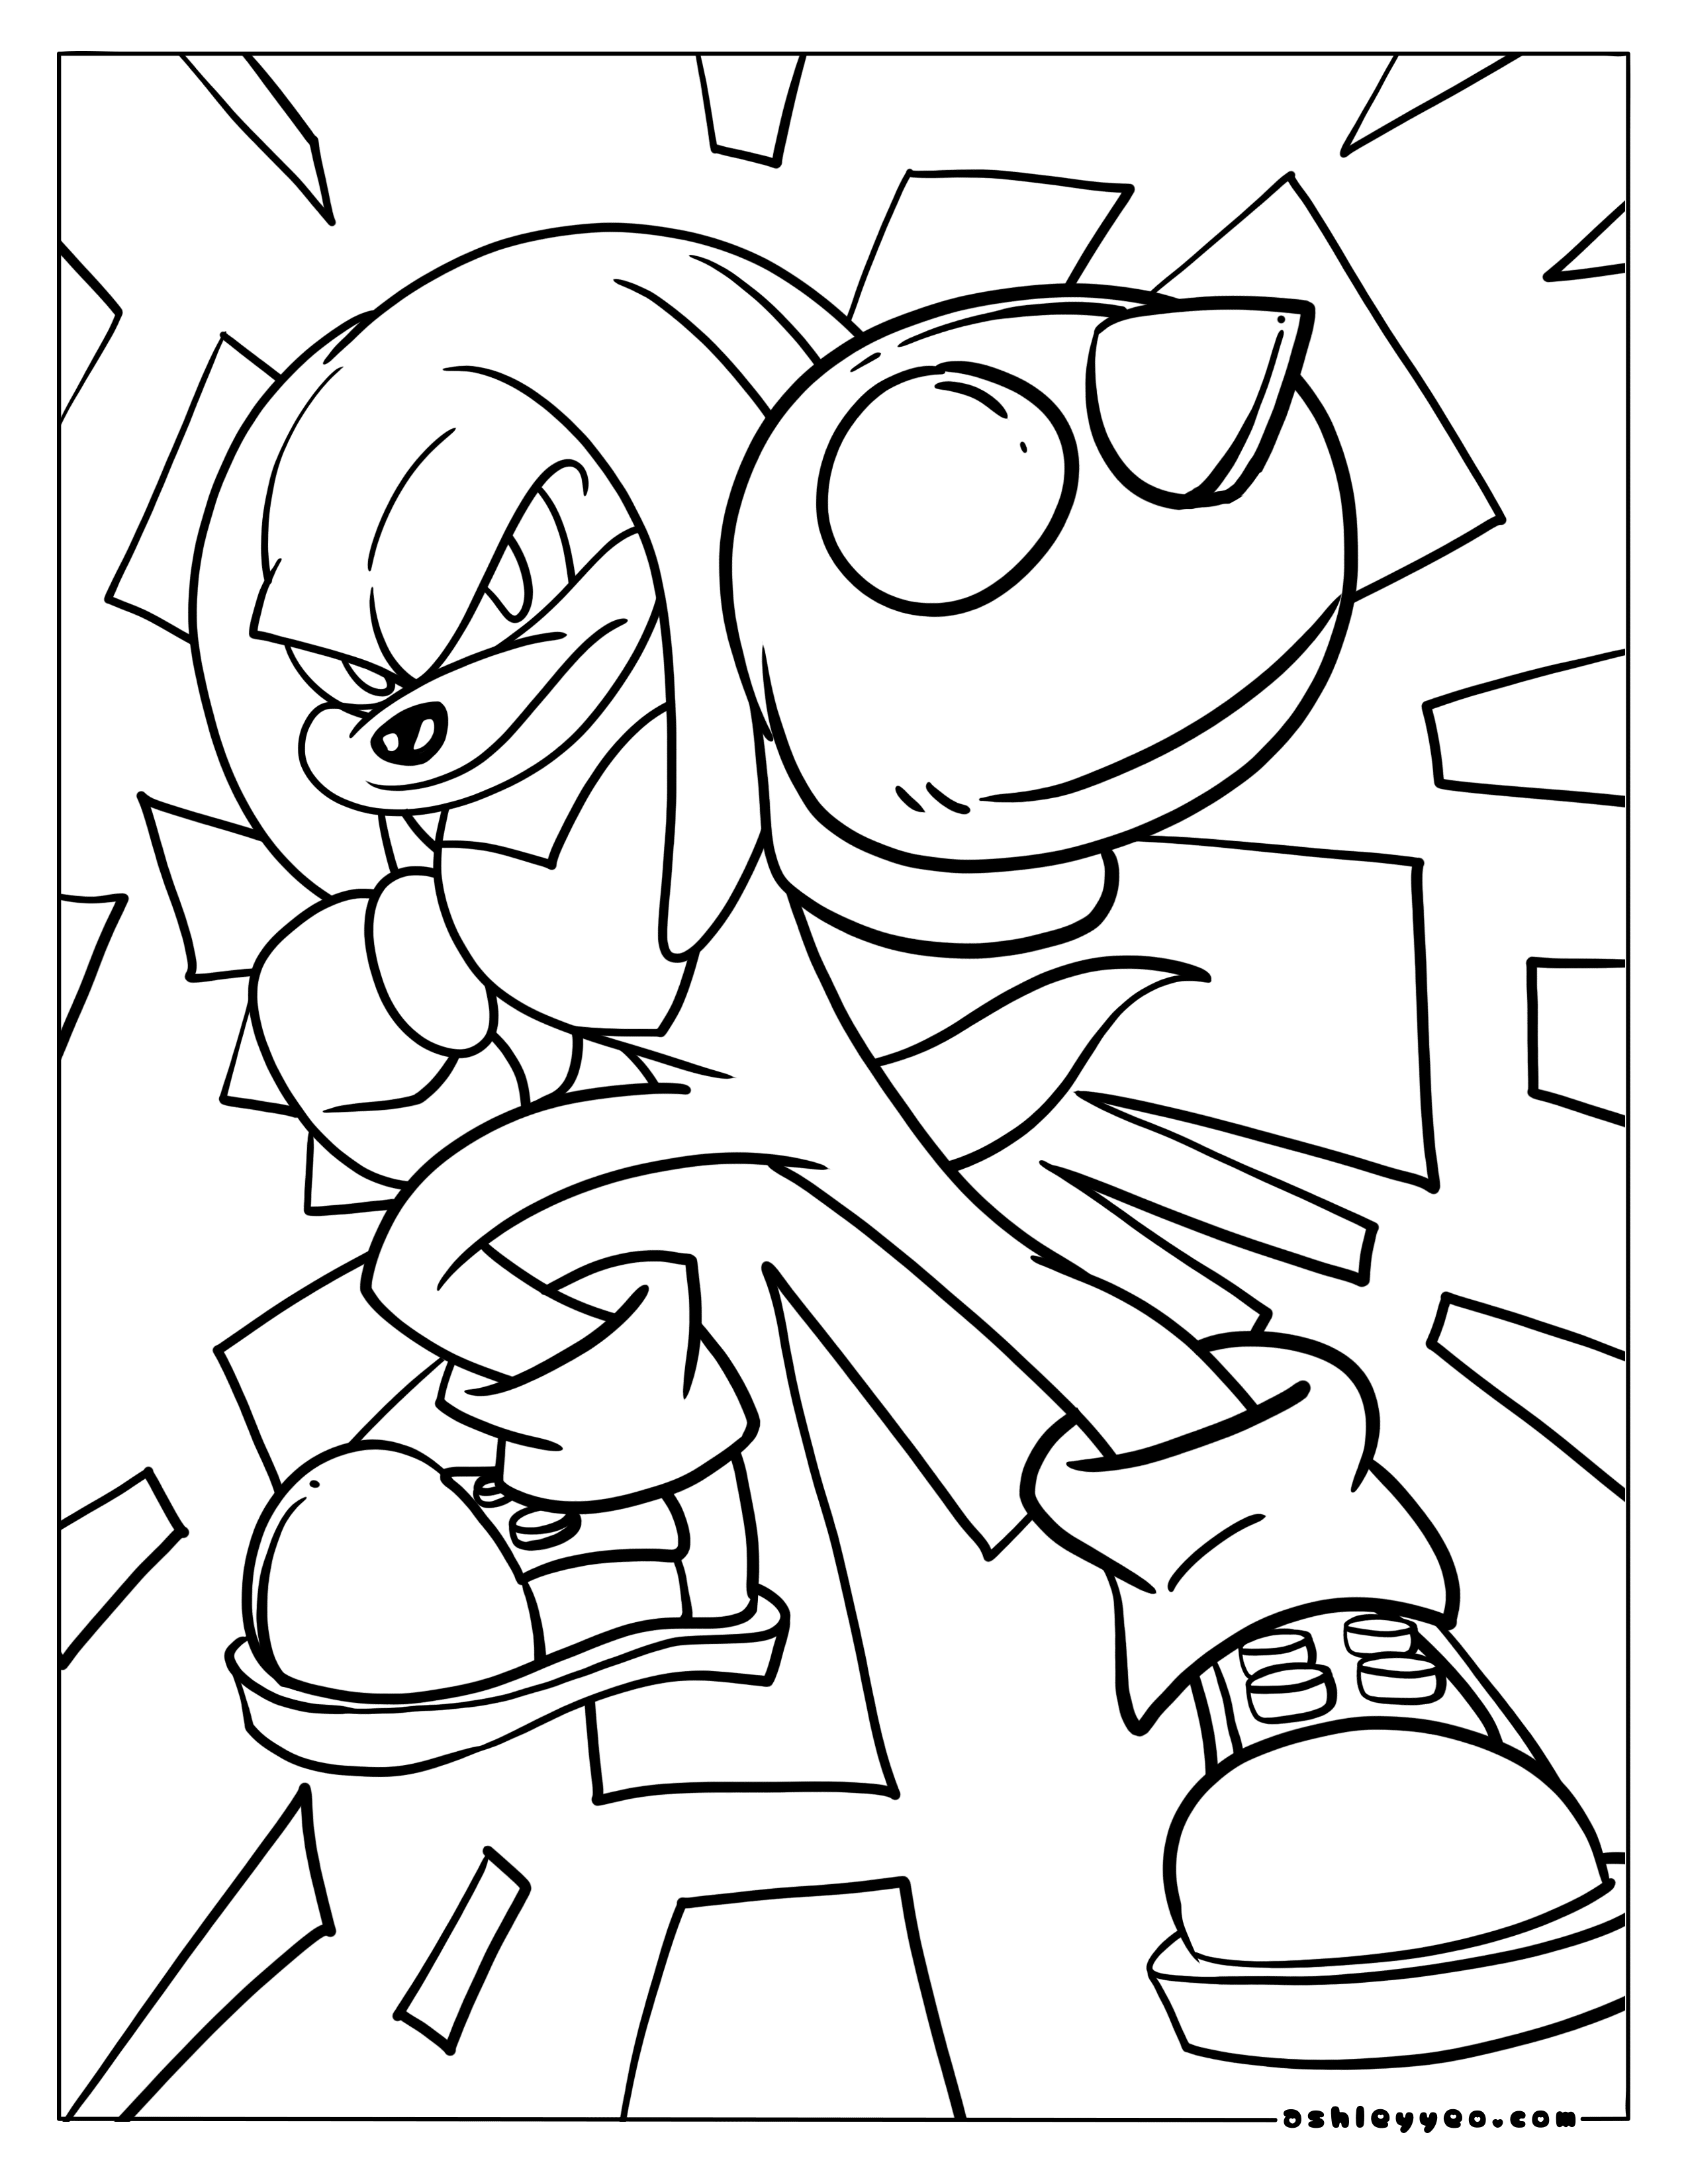 Free sonic coloring pages for kids